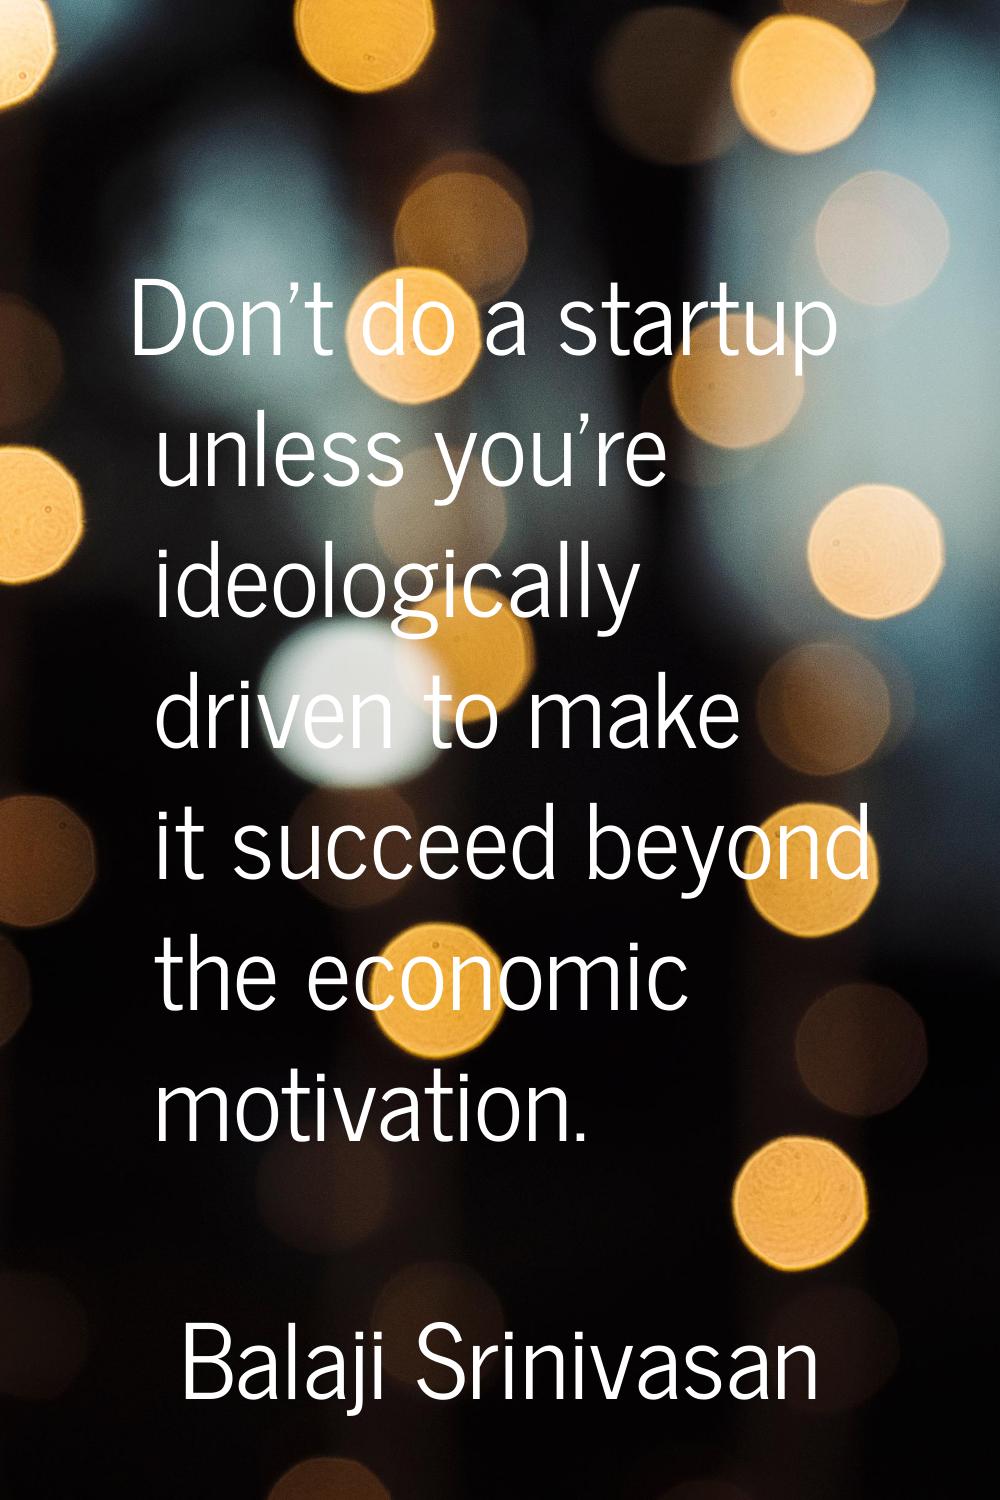 Don't do a startup unless you're ideologically driven to make it succeed beyond the economic motiva